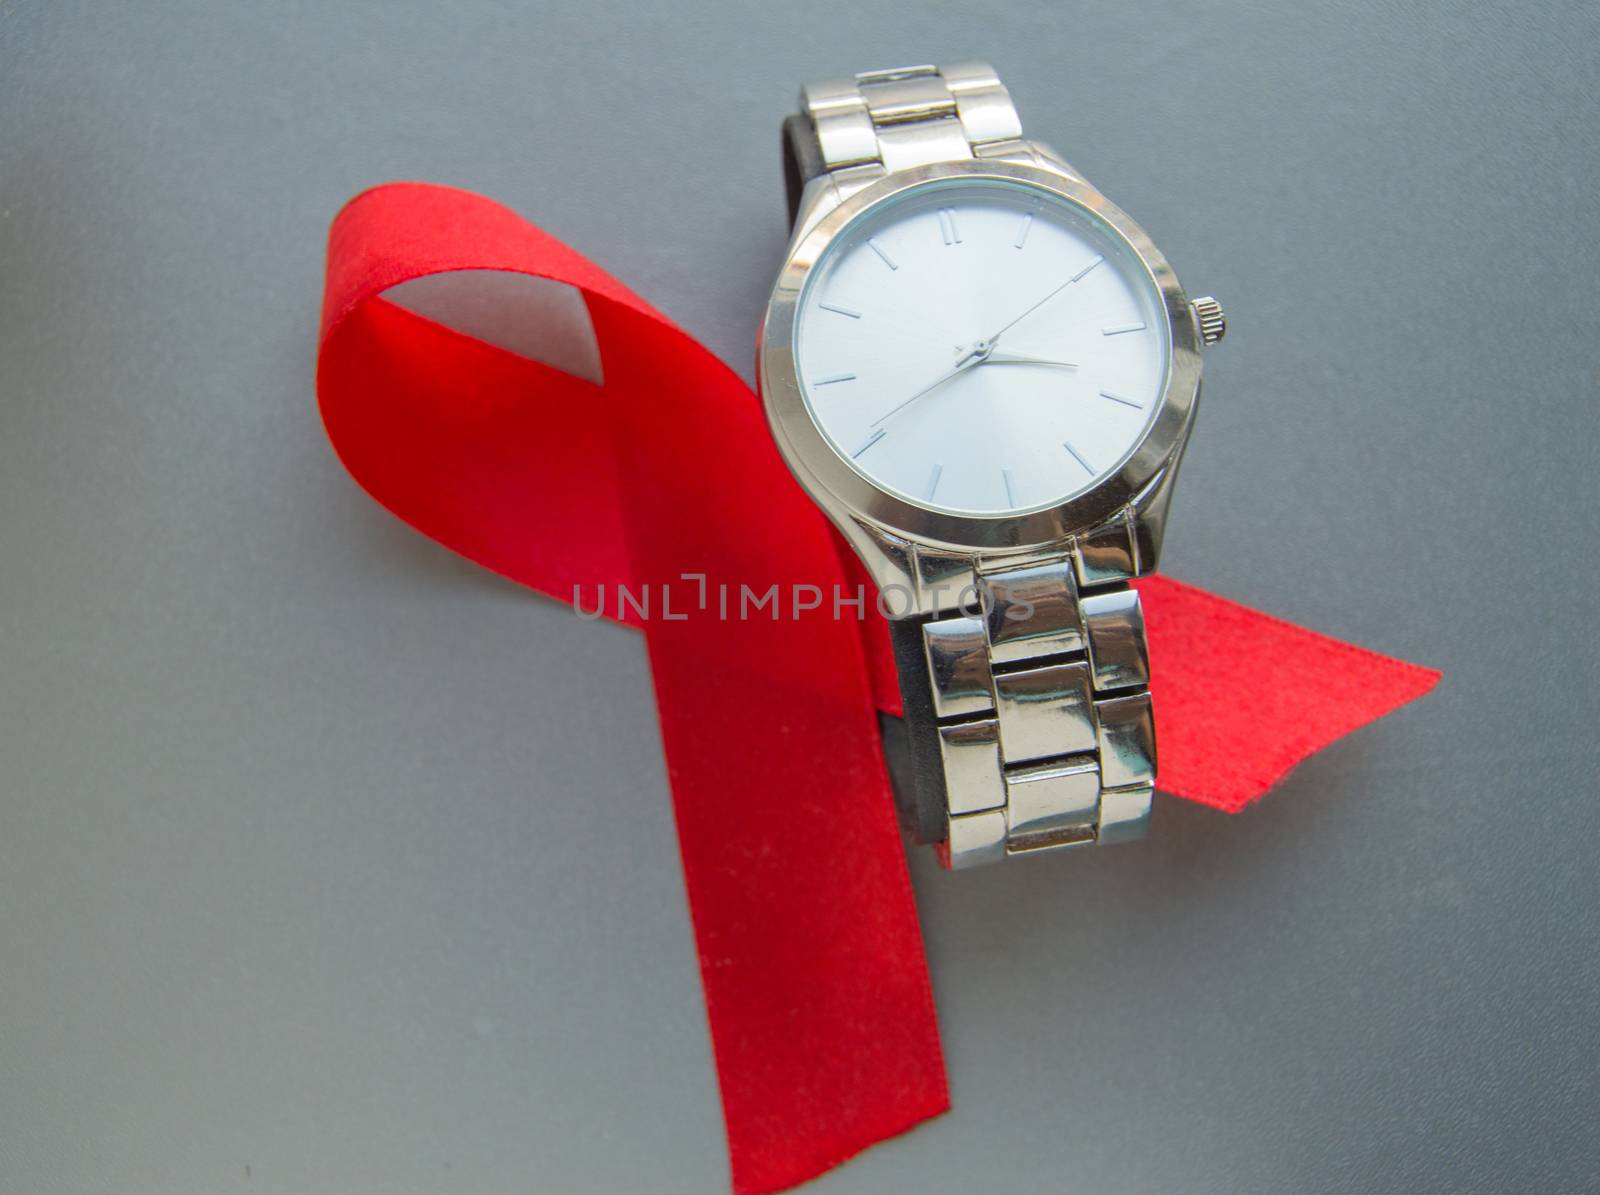 World AIDS day, the symbol of the red ribbon and the clock - do not waste time to start treatment.